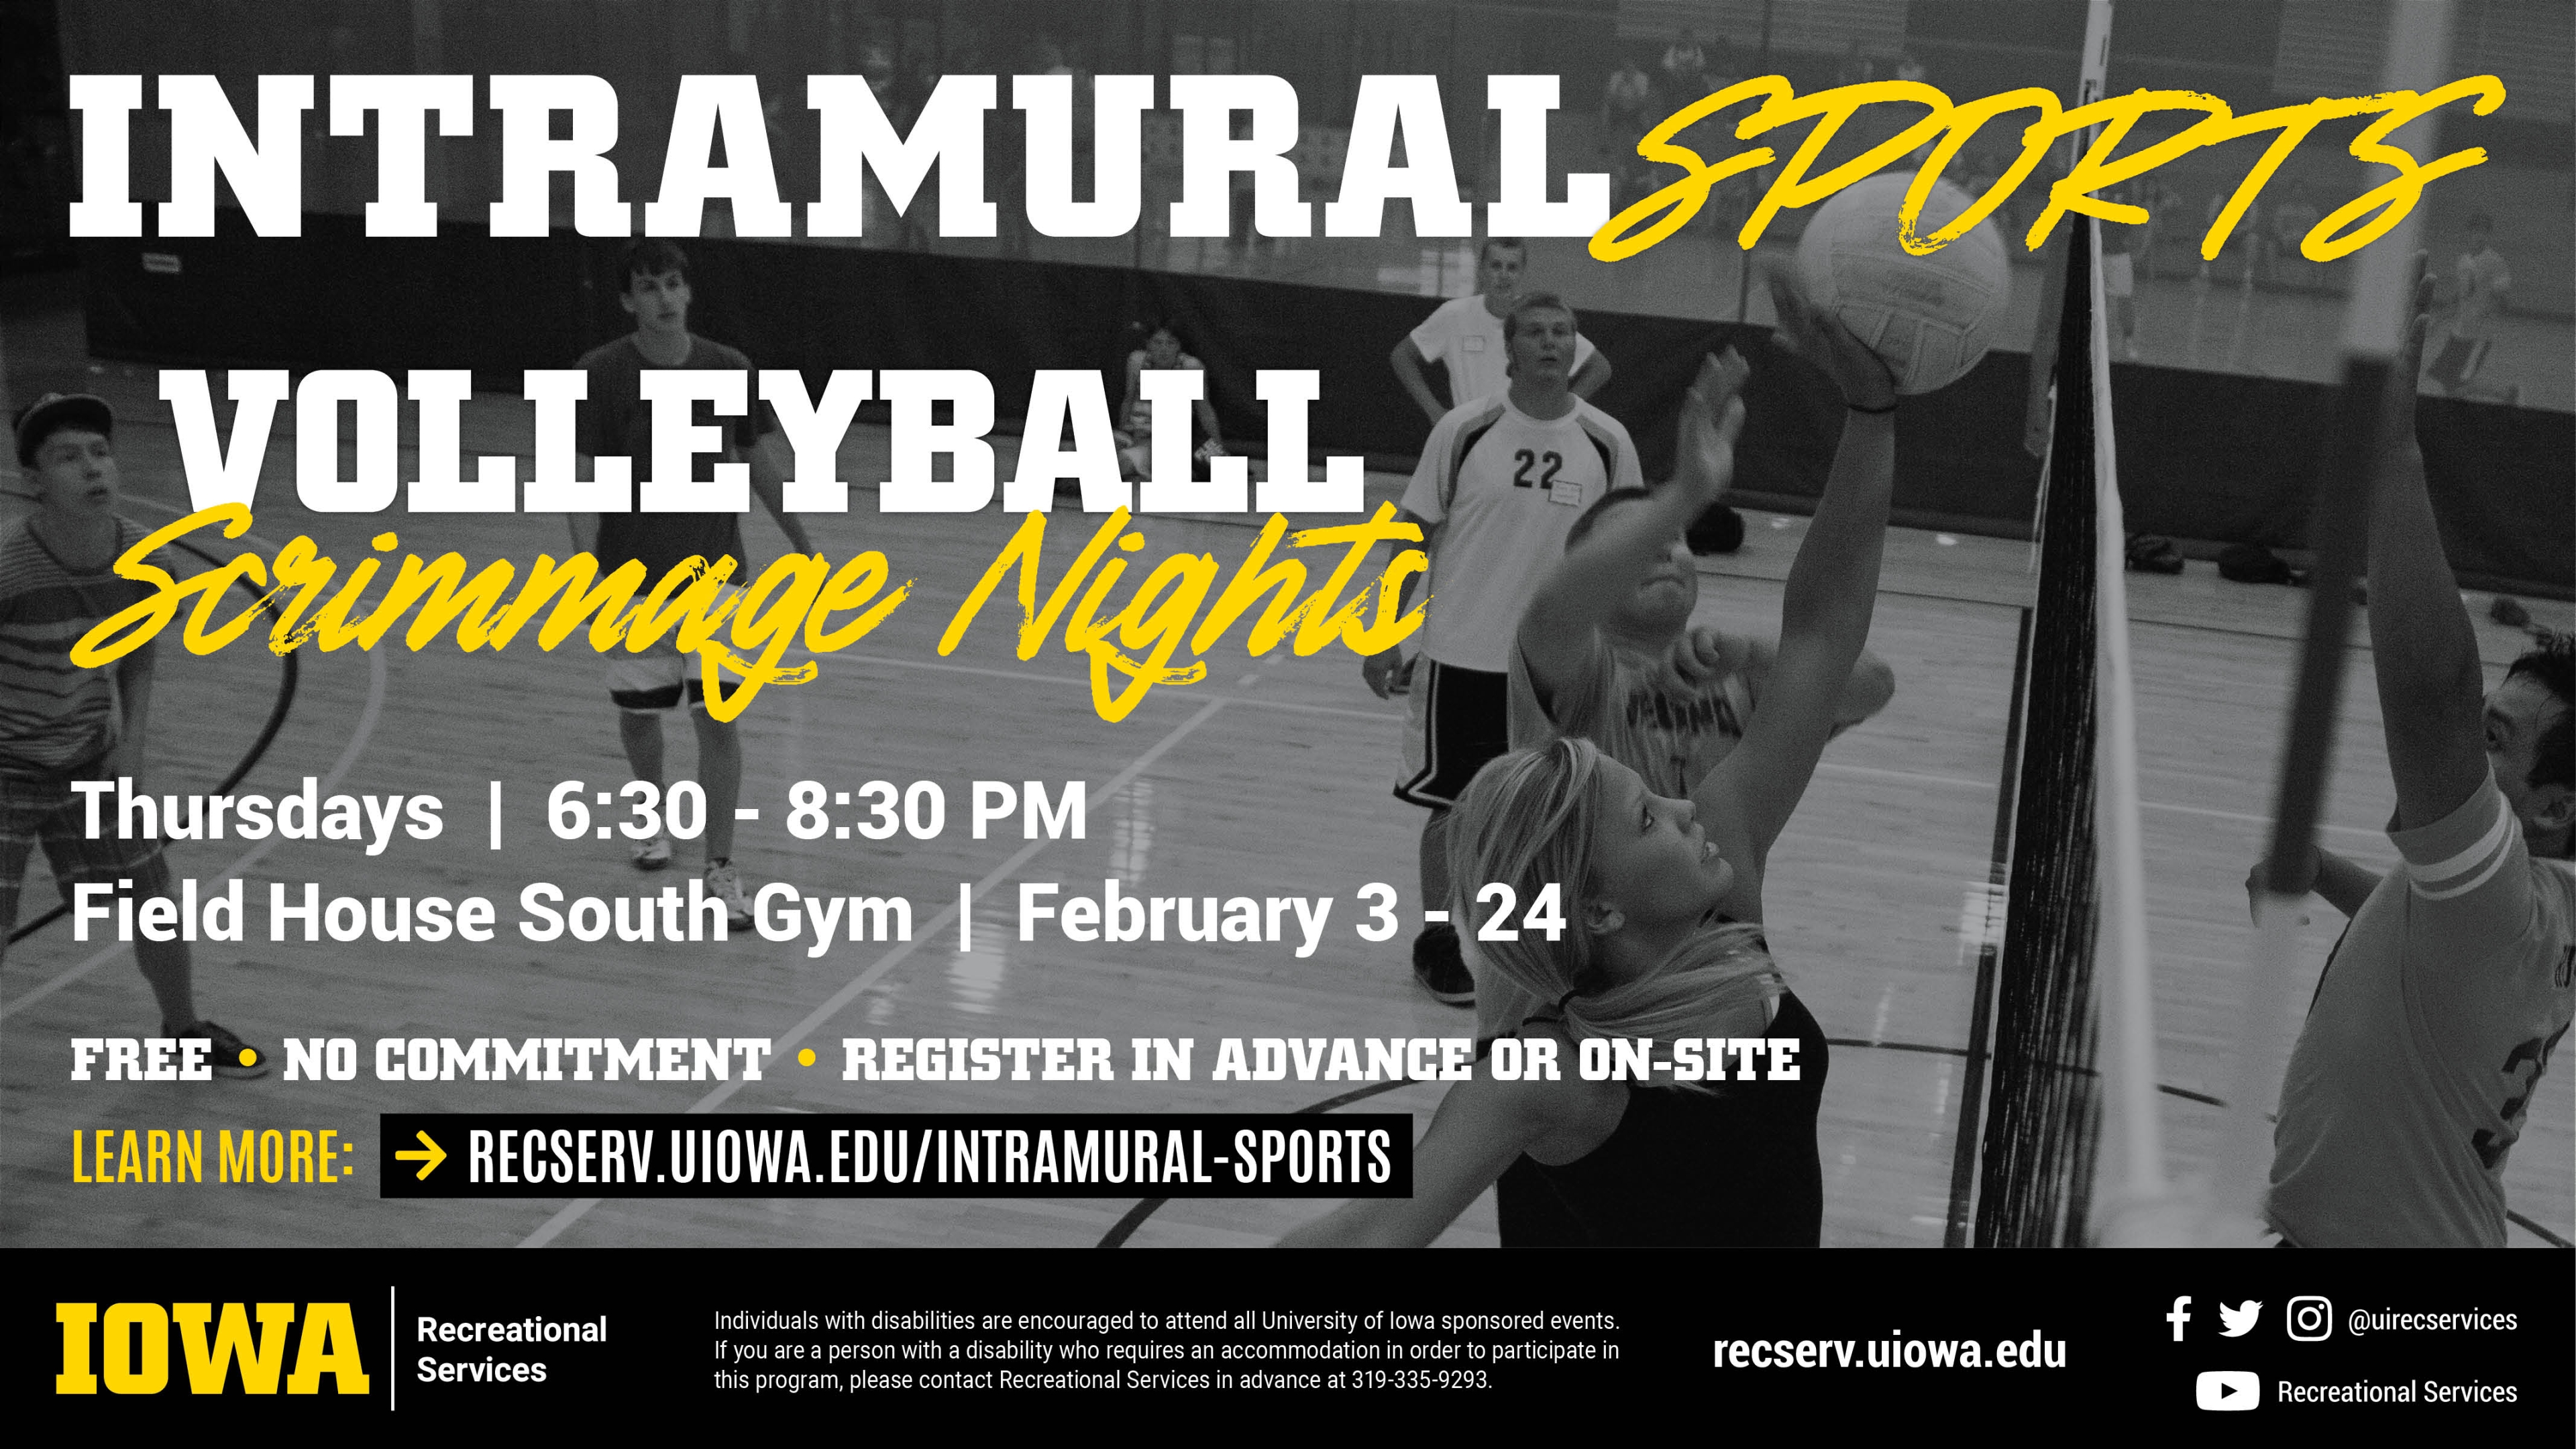 Intramural Sports Volleyball Scrimmage Nights Thursdays | 6:30 - 8:30 PM | Field House South Gym | February 3 - 24. FREE | NO COMMITMENT | REGISTER IN ADVANCE OR ON-SITE Learn more at recserv.uiowa.edu/intramural-sports